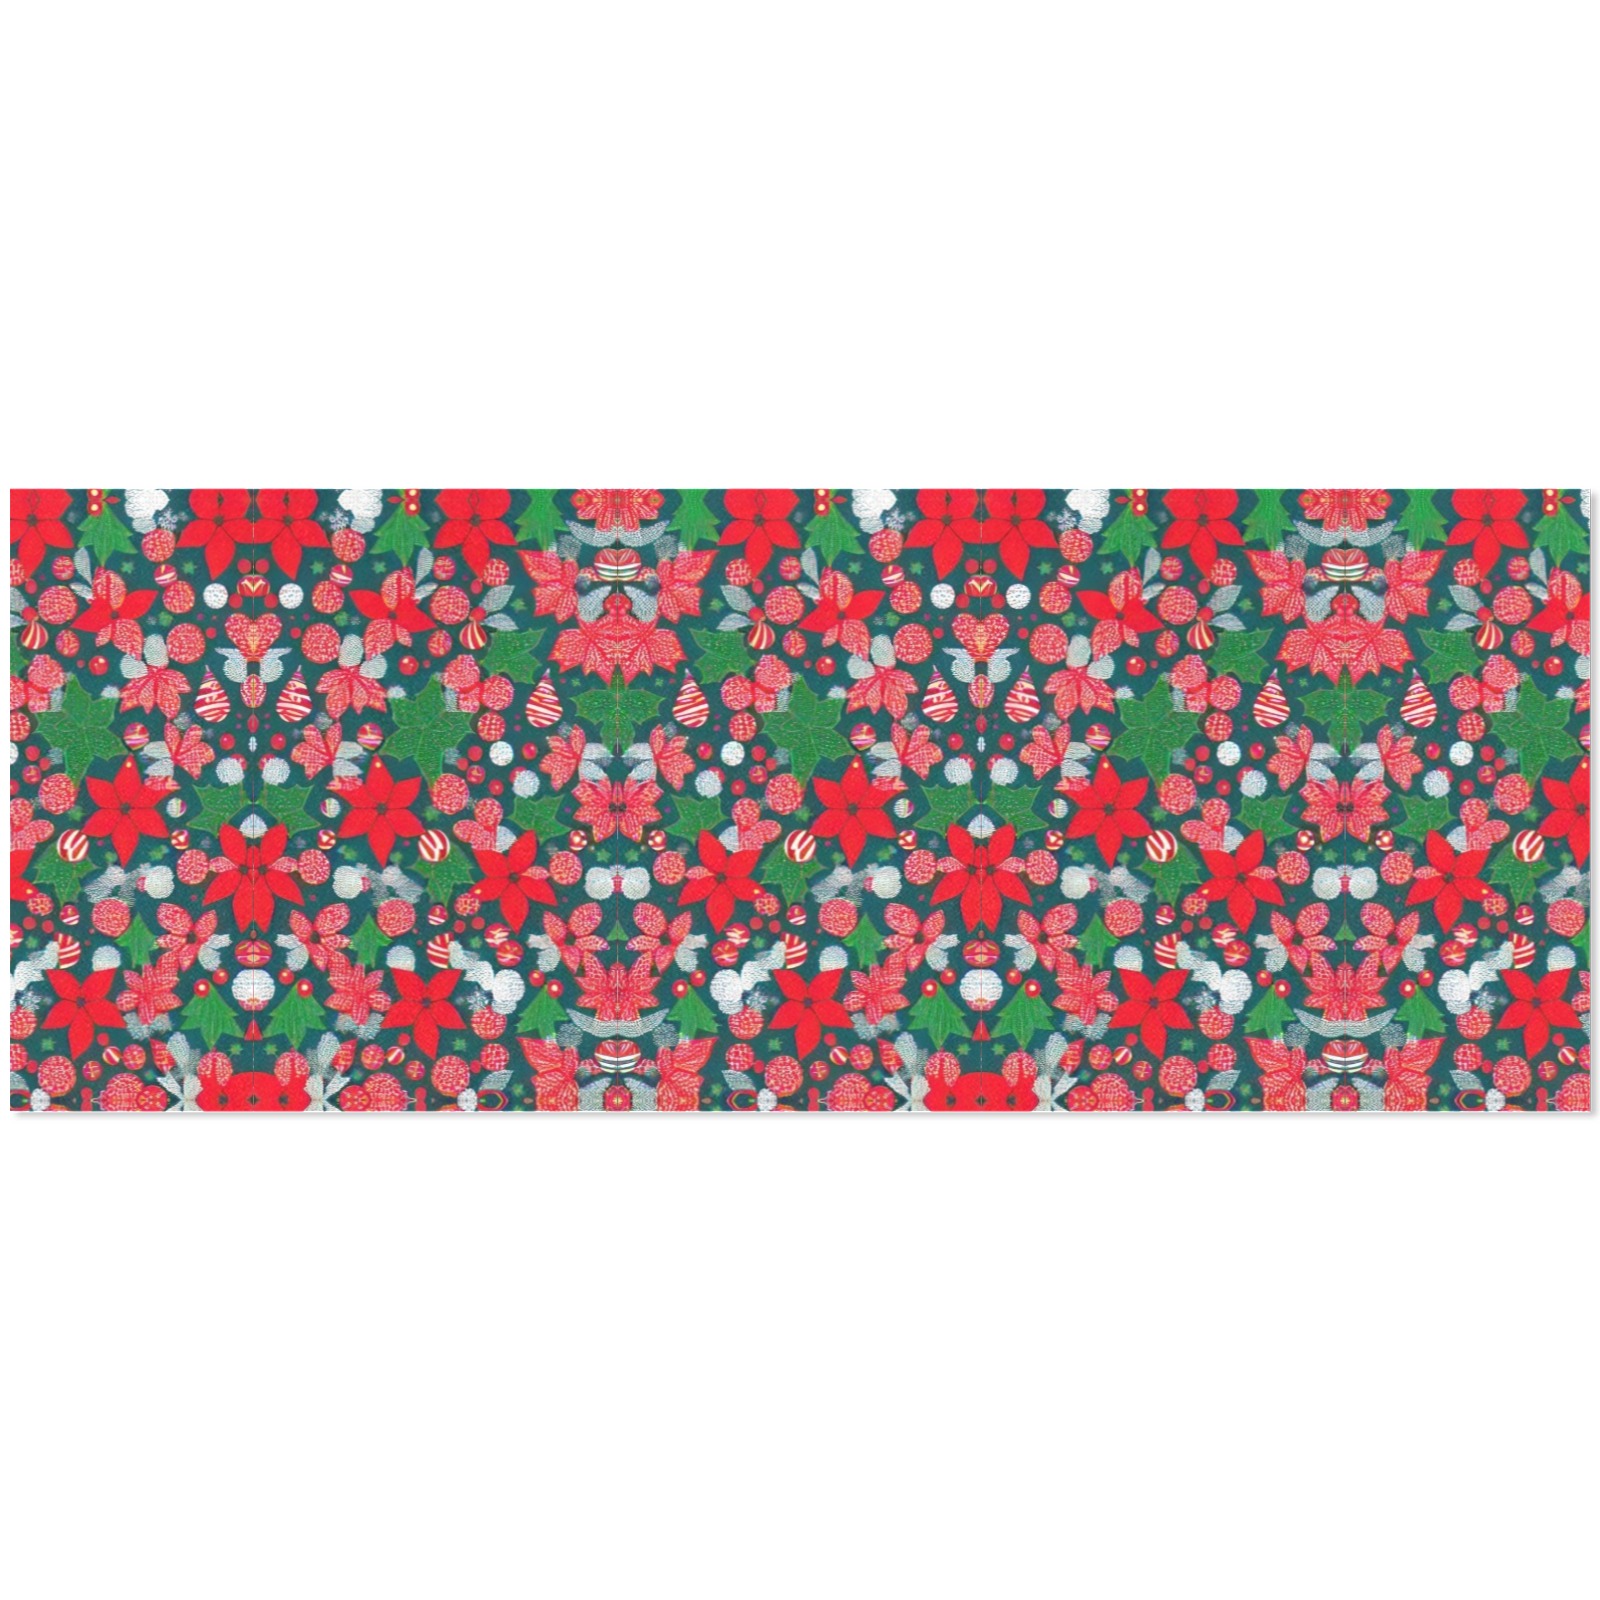 c8 Gift Wrapping Paper 58"x 23" (1 Roll)